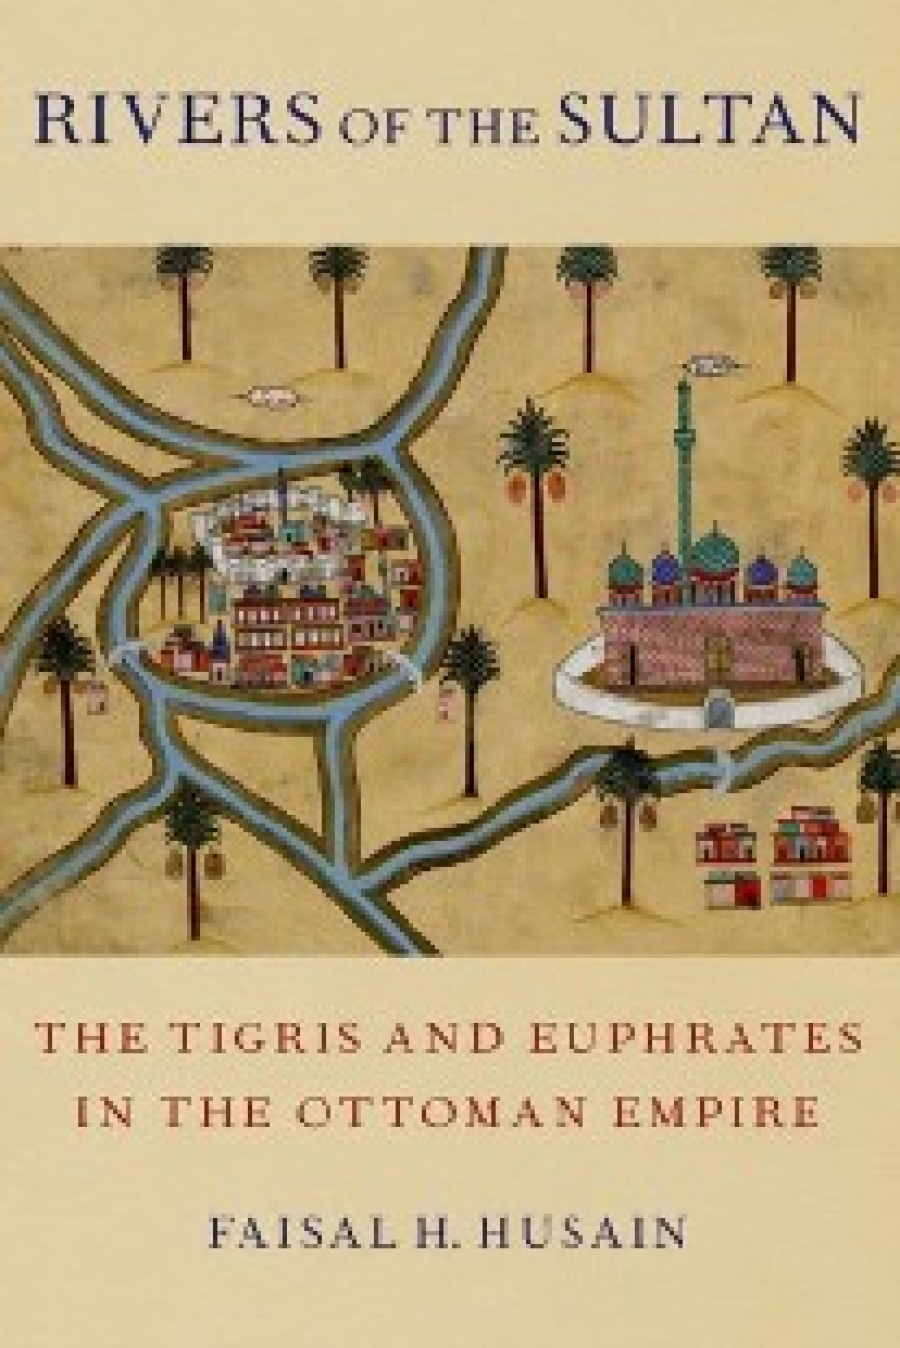 Husain, Faisal H. Rivers of the Sultan: The Tigris and Euphrates in the Ottoman Empire 